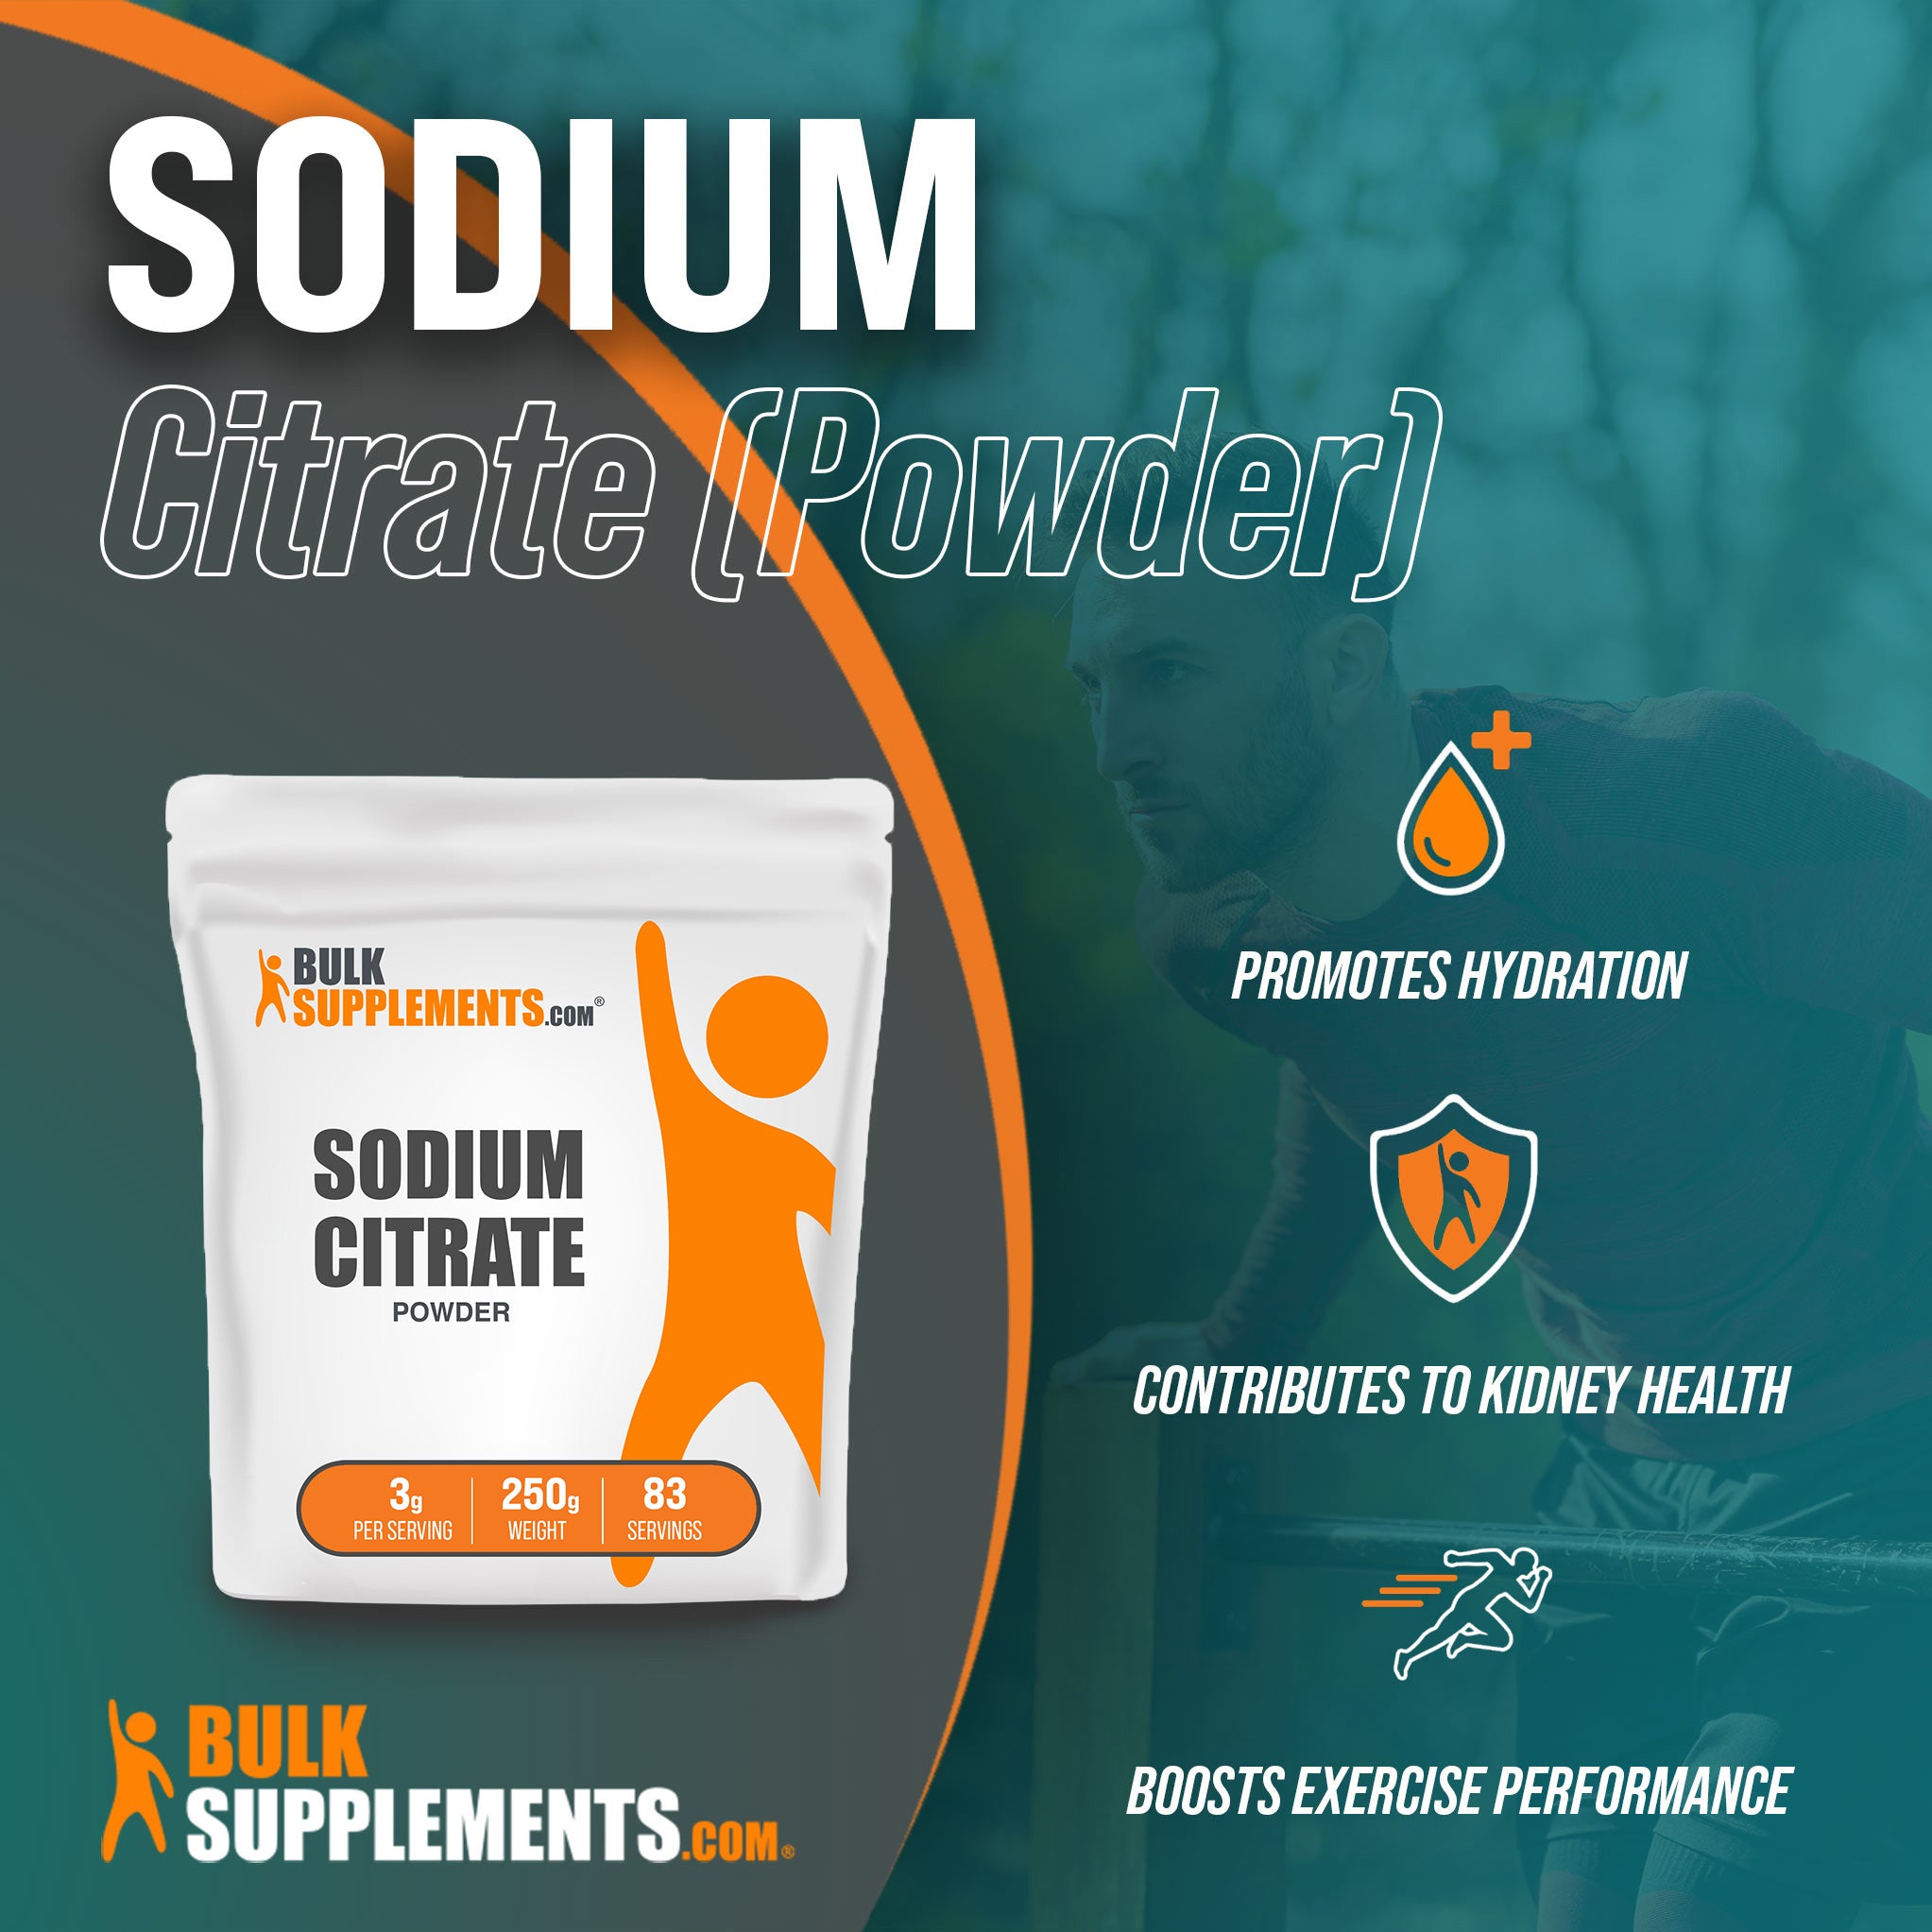 Benefits of Sodium Citrate: promotes hydration, contributes to kidney health, boosts exercise performance